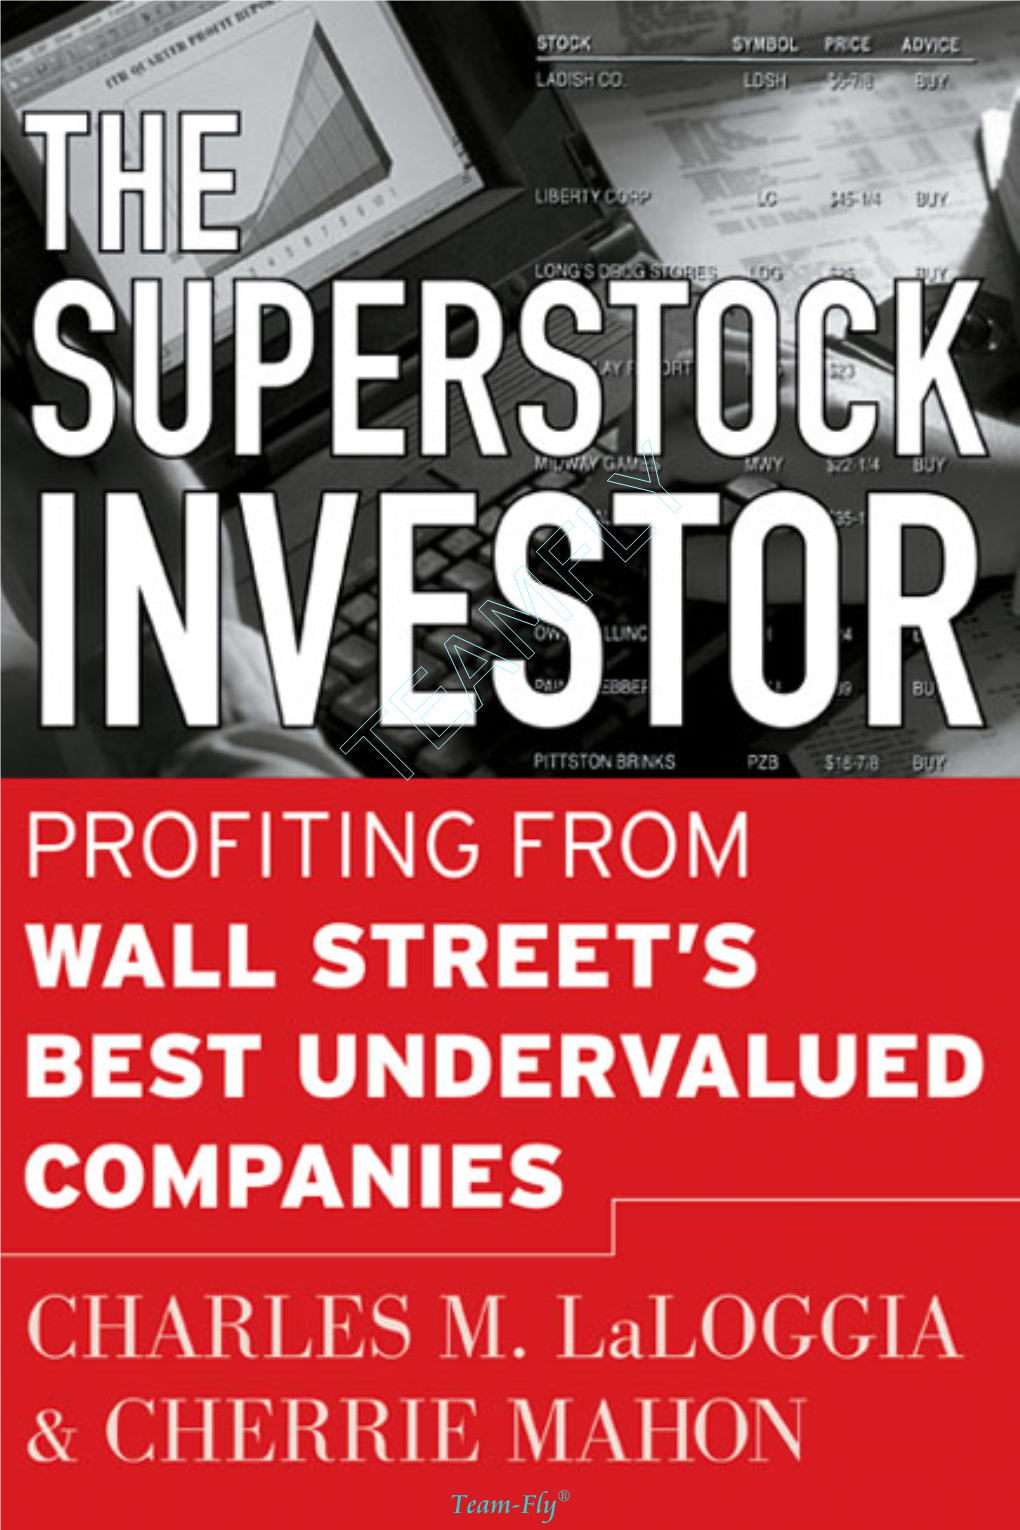 SUPERSTOCK INVESTOR This Page Intentionally Left Blank